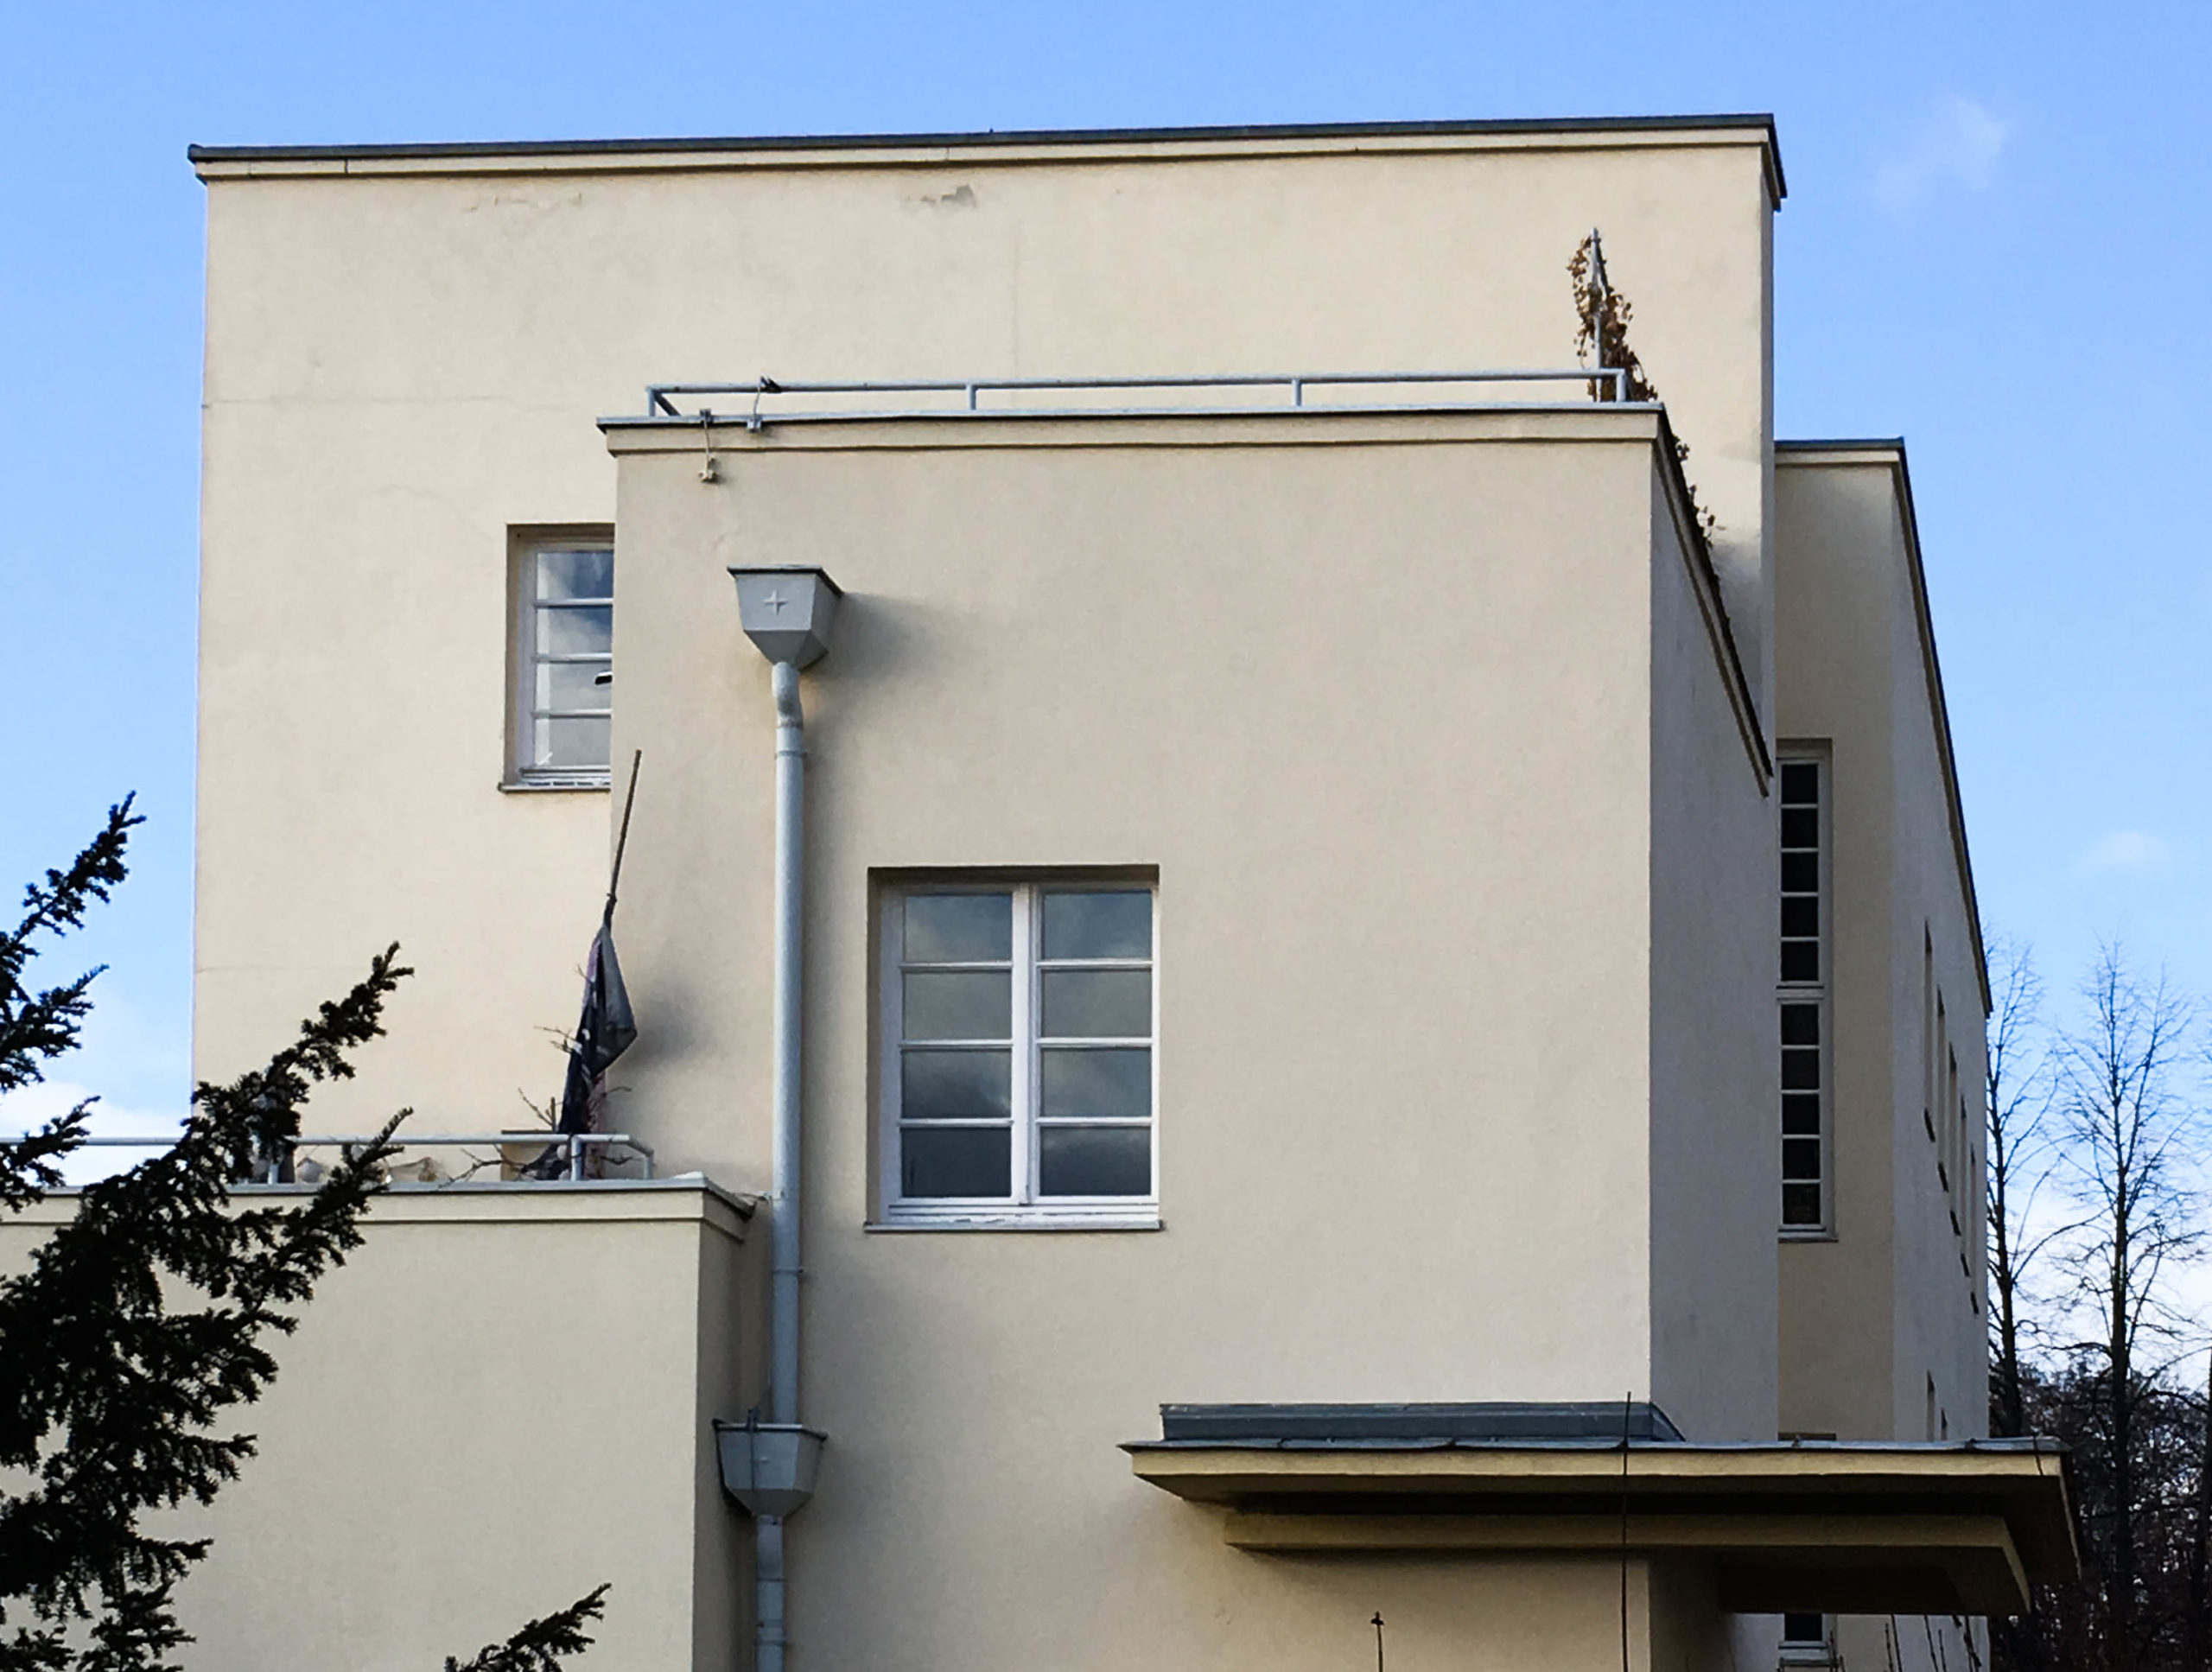 Terrace House, 1927. Architect: Peter Behrens